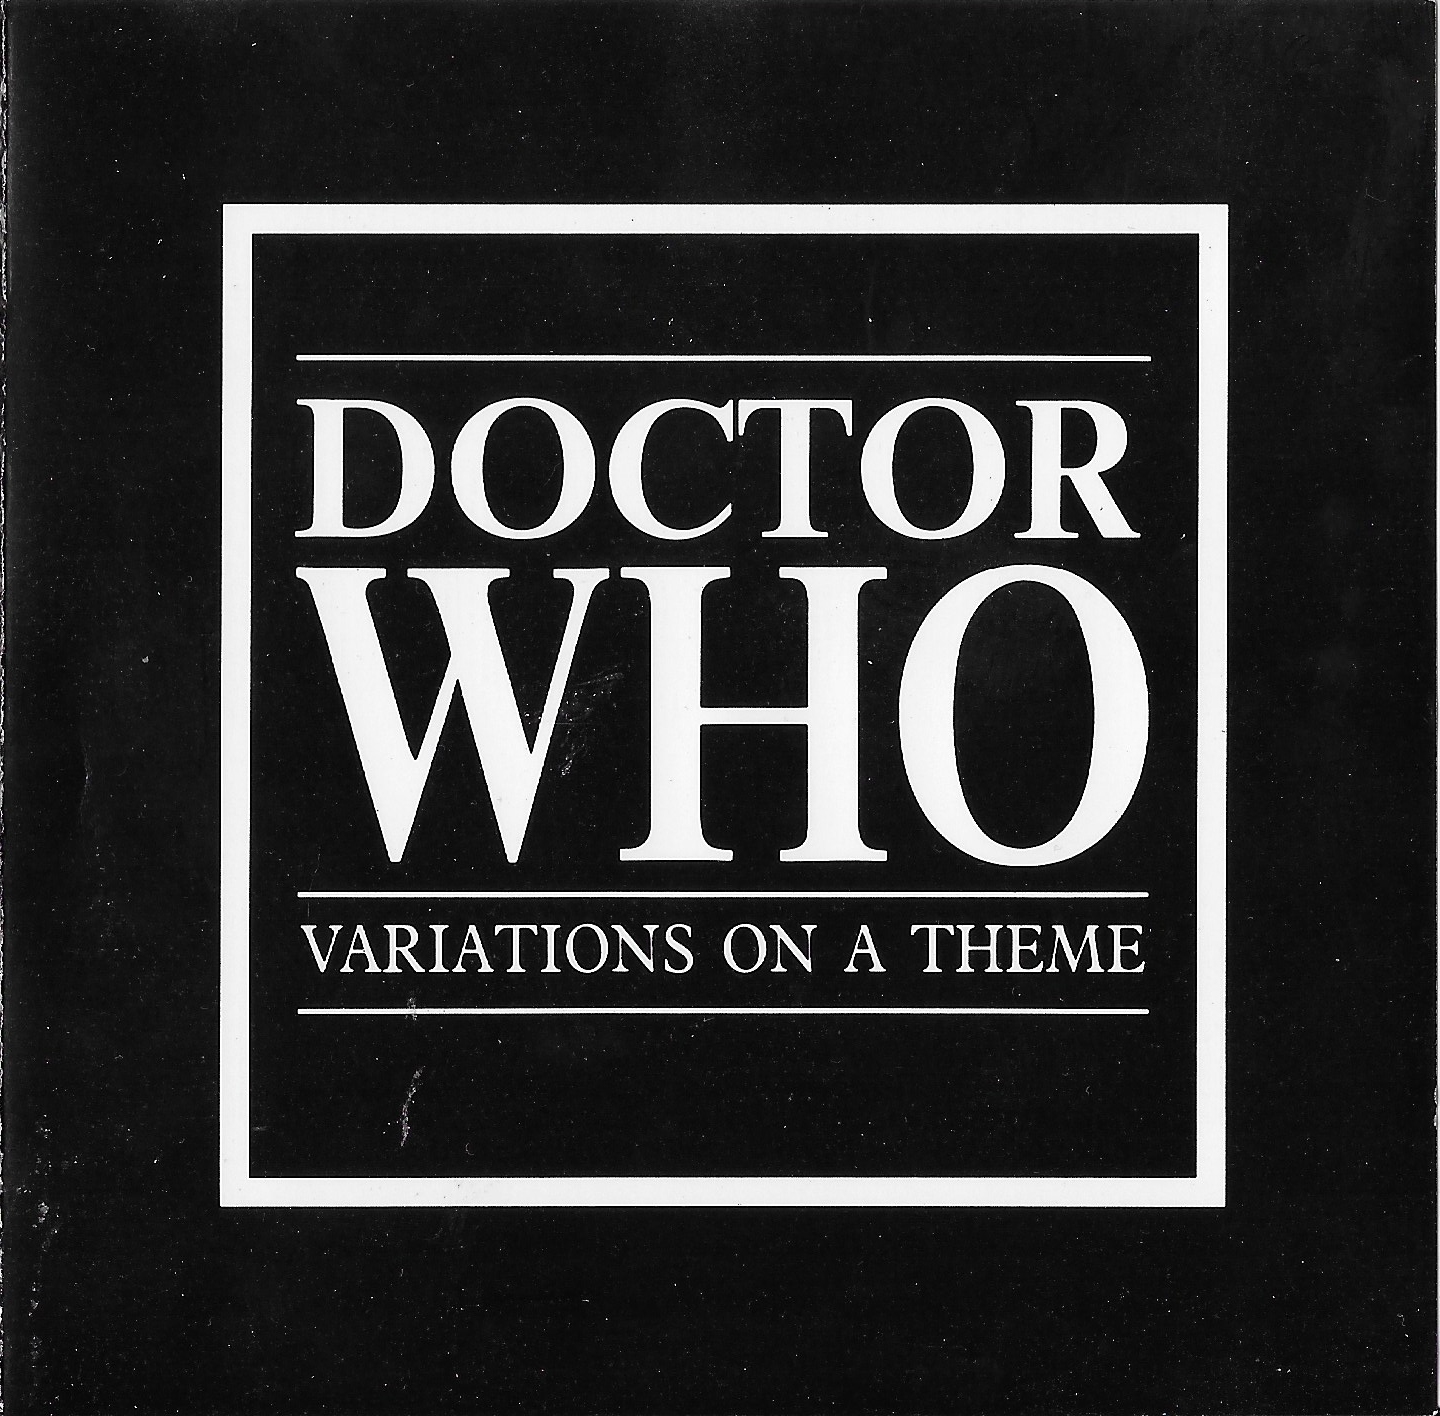 Picture of CD MMI - 4 Doctor Who - Variations on a theme by artist Ron Grainer from the BBC records and Tapes library